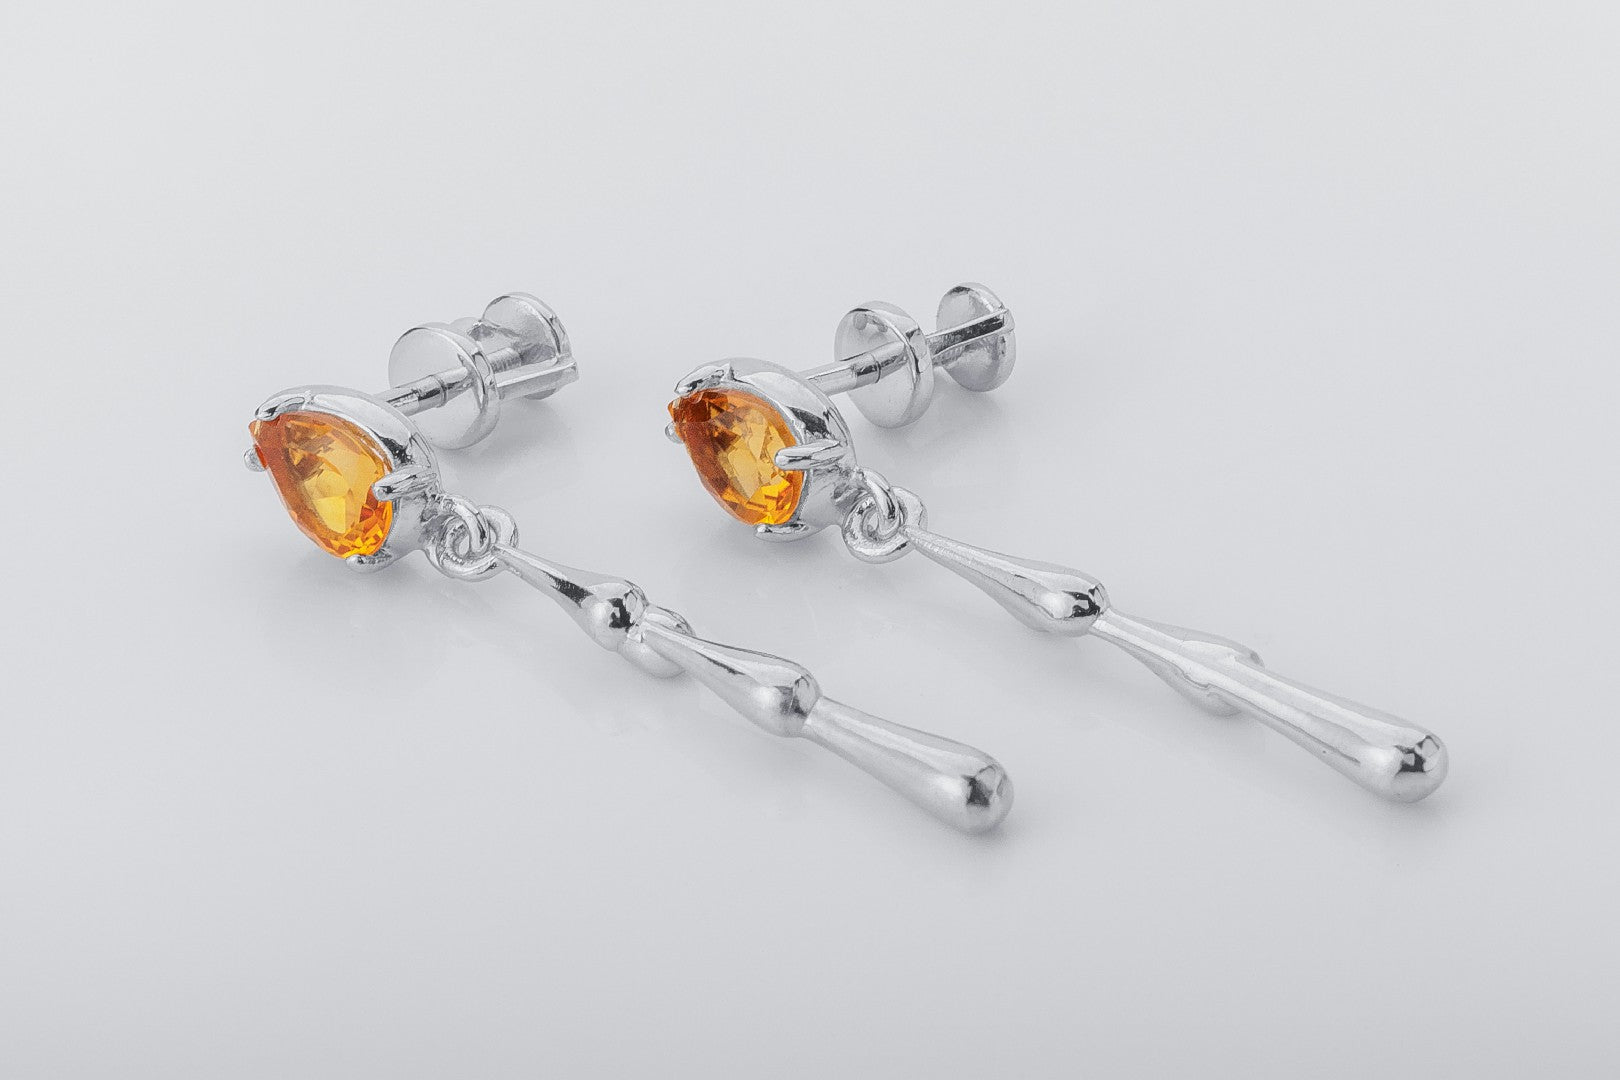 Candle Flame Citrine Earrings with Wax Droplets, Rhodium plated 925 Silver